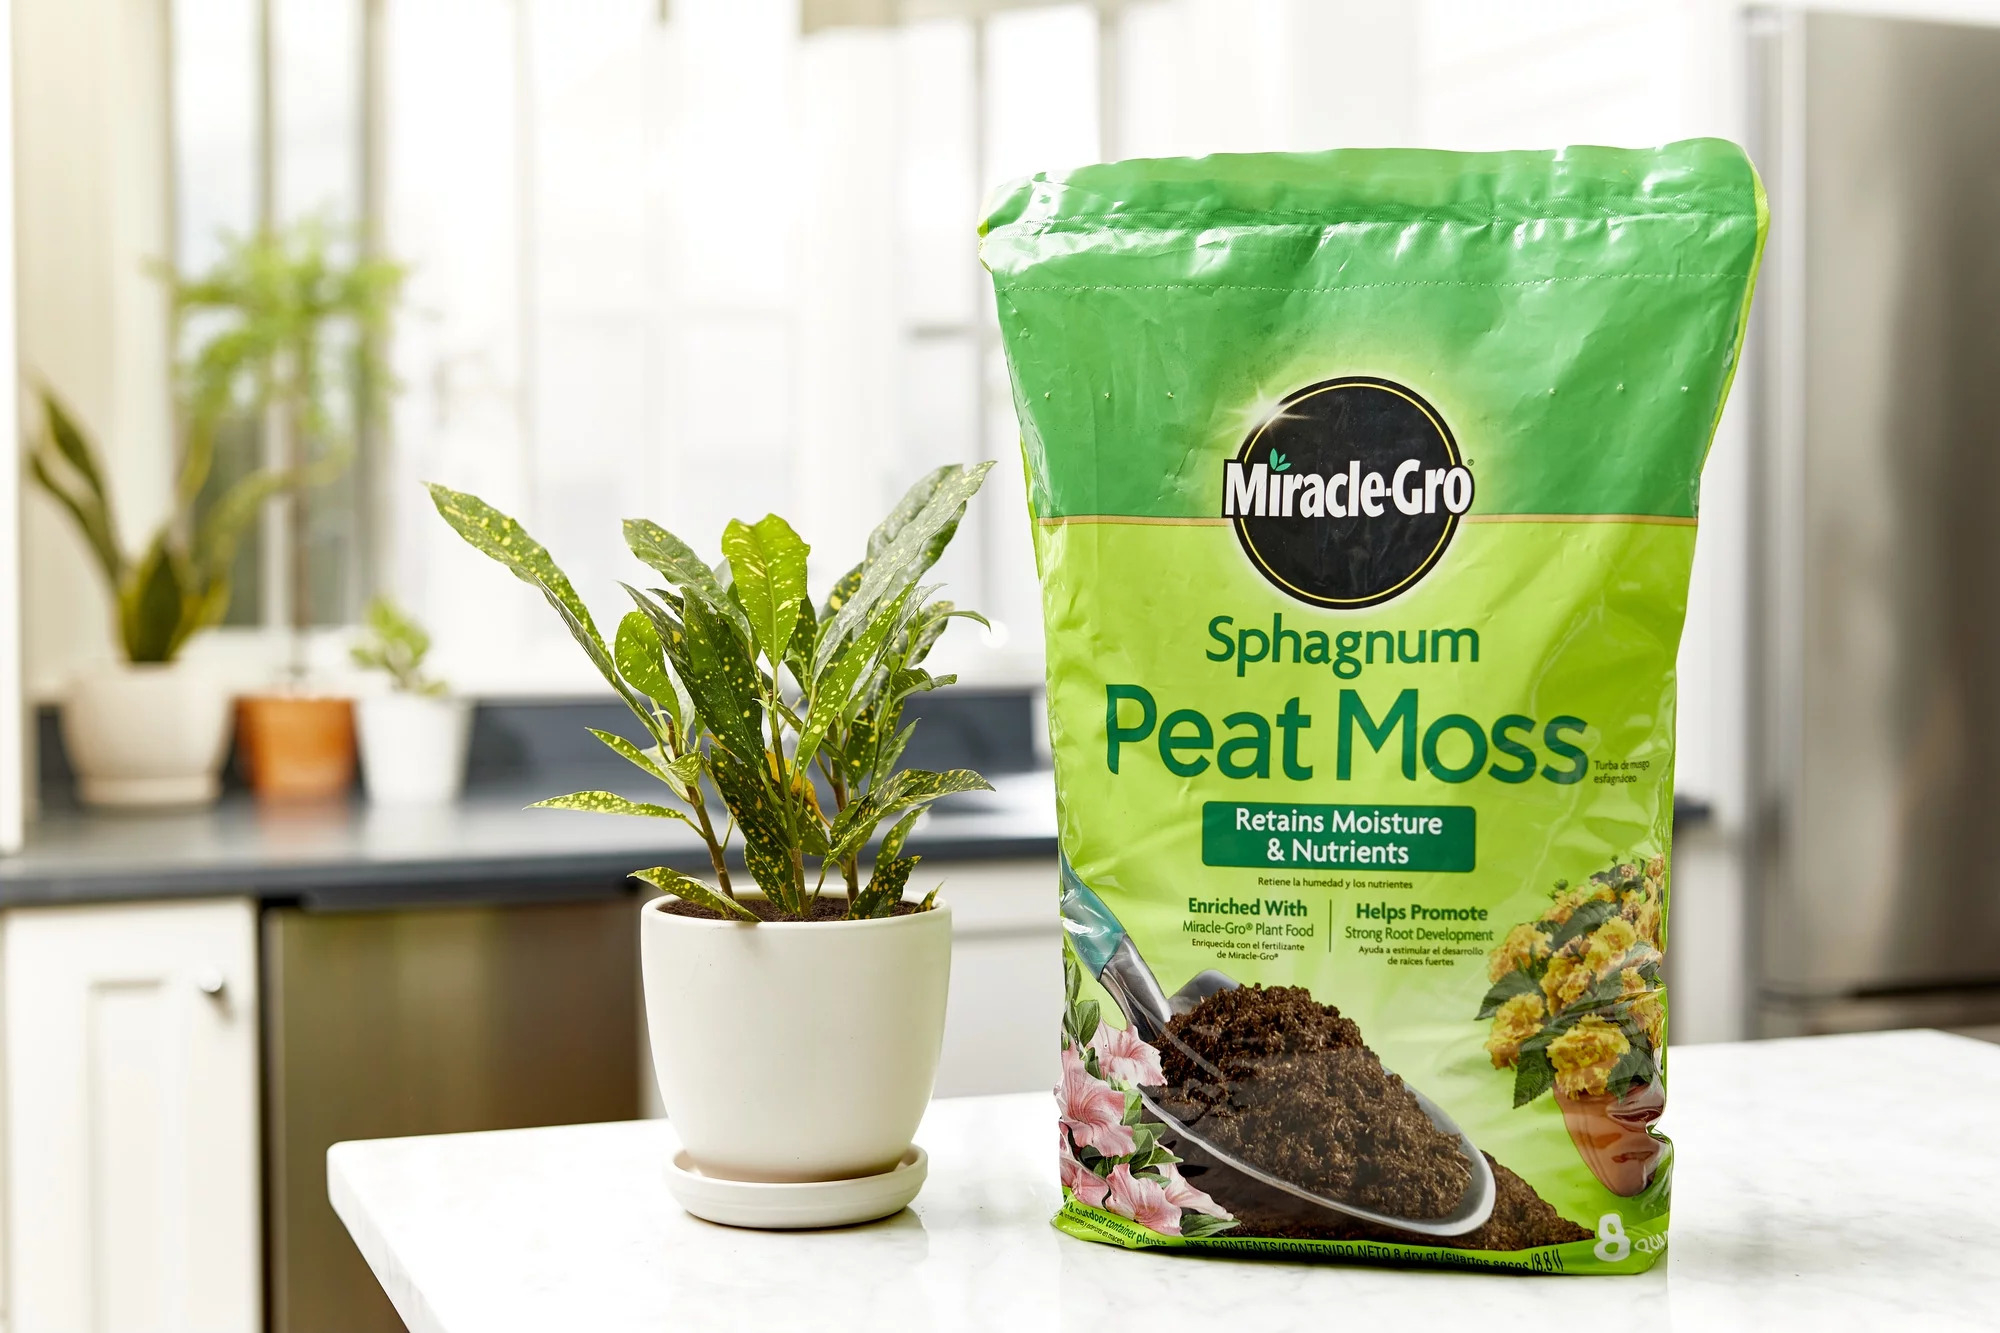 The bag of peat moss next to a plant